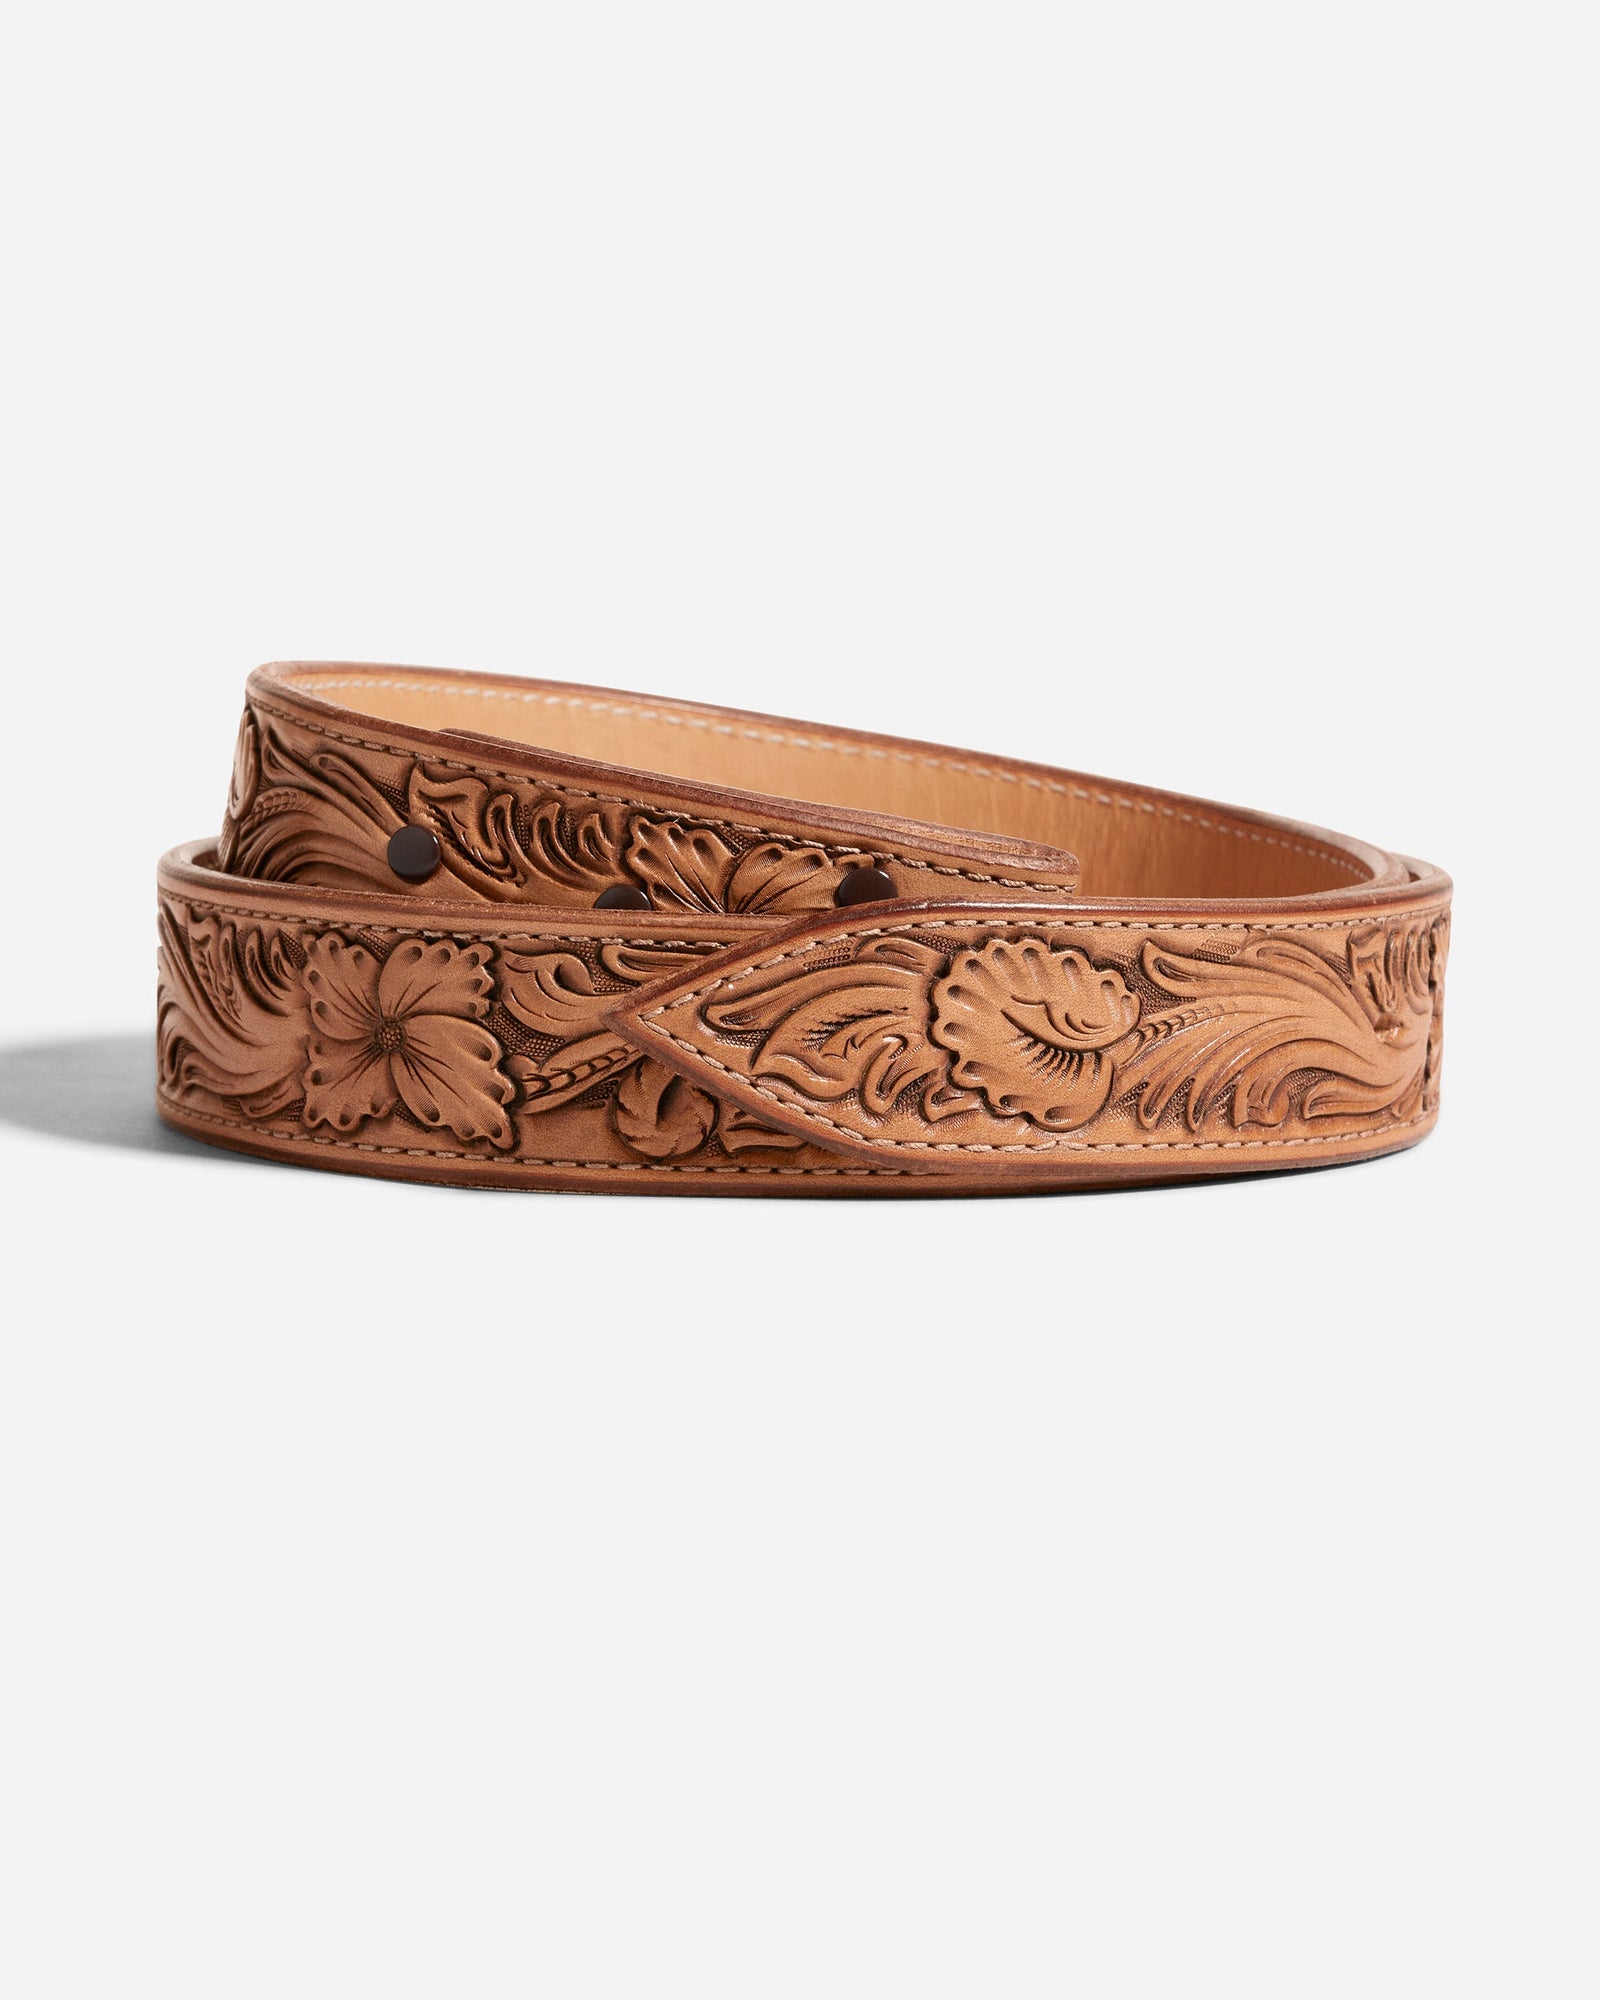 John Dutton Hand Tooled Floral Leather Belt By Burns Cowboy since 1876